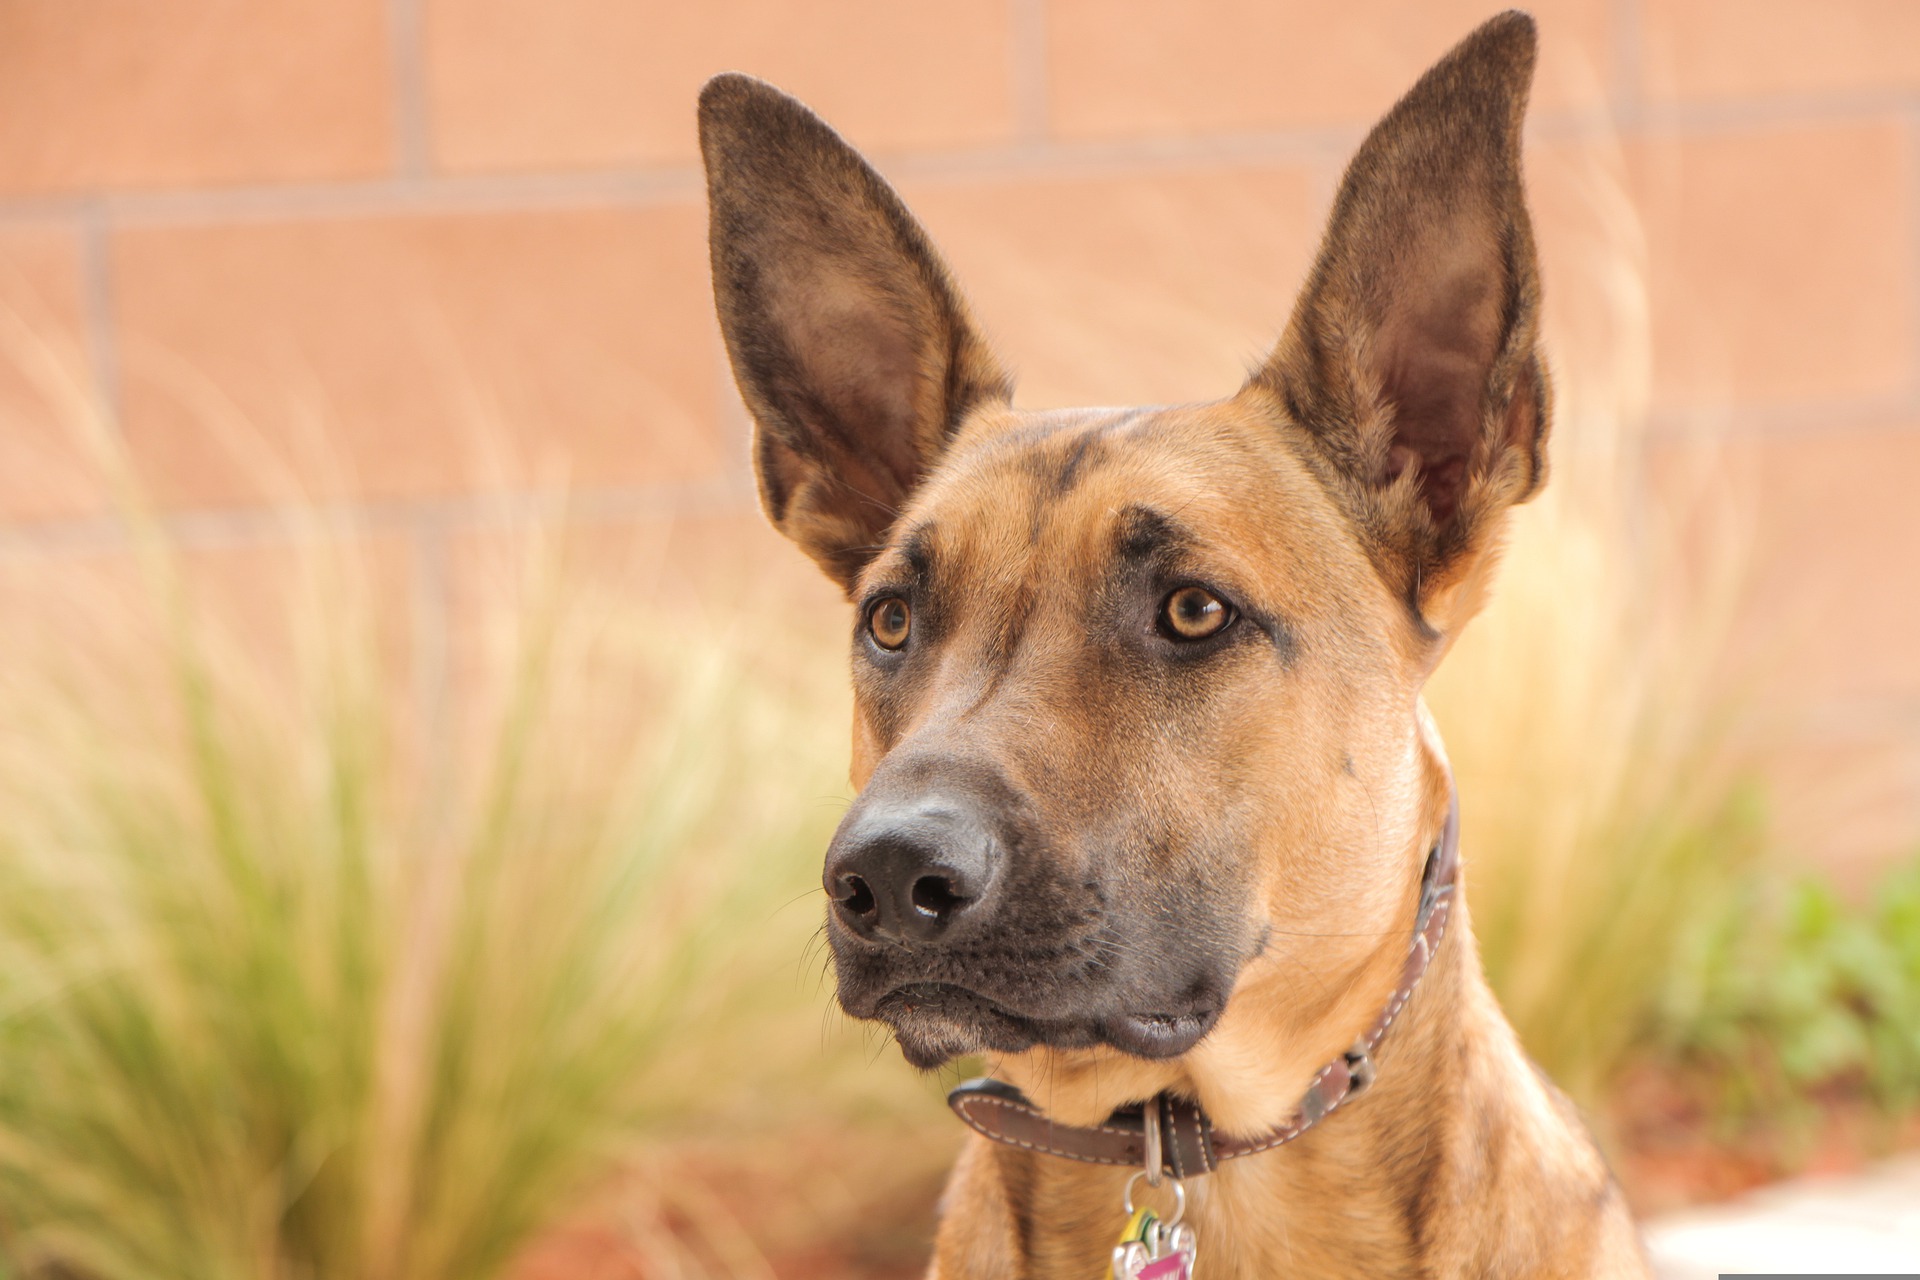 Is The Belgian Malinois A Good Family Dog?